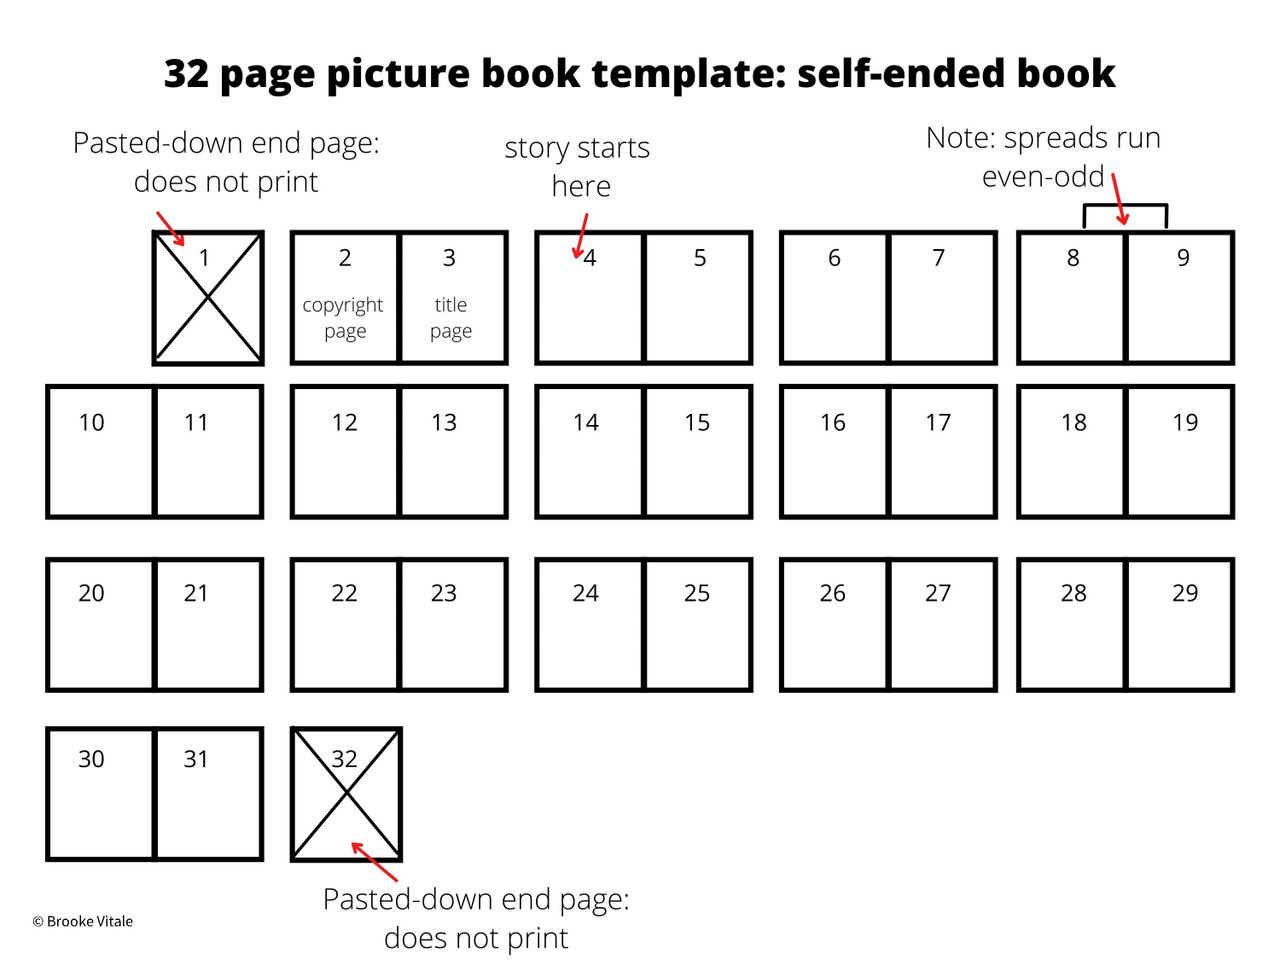 how-to-write-a-childrens-picture-book-template-unugtp-news